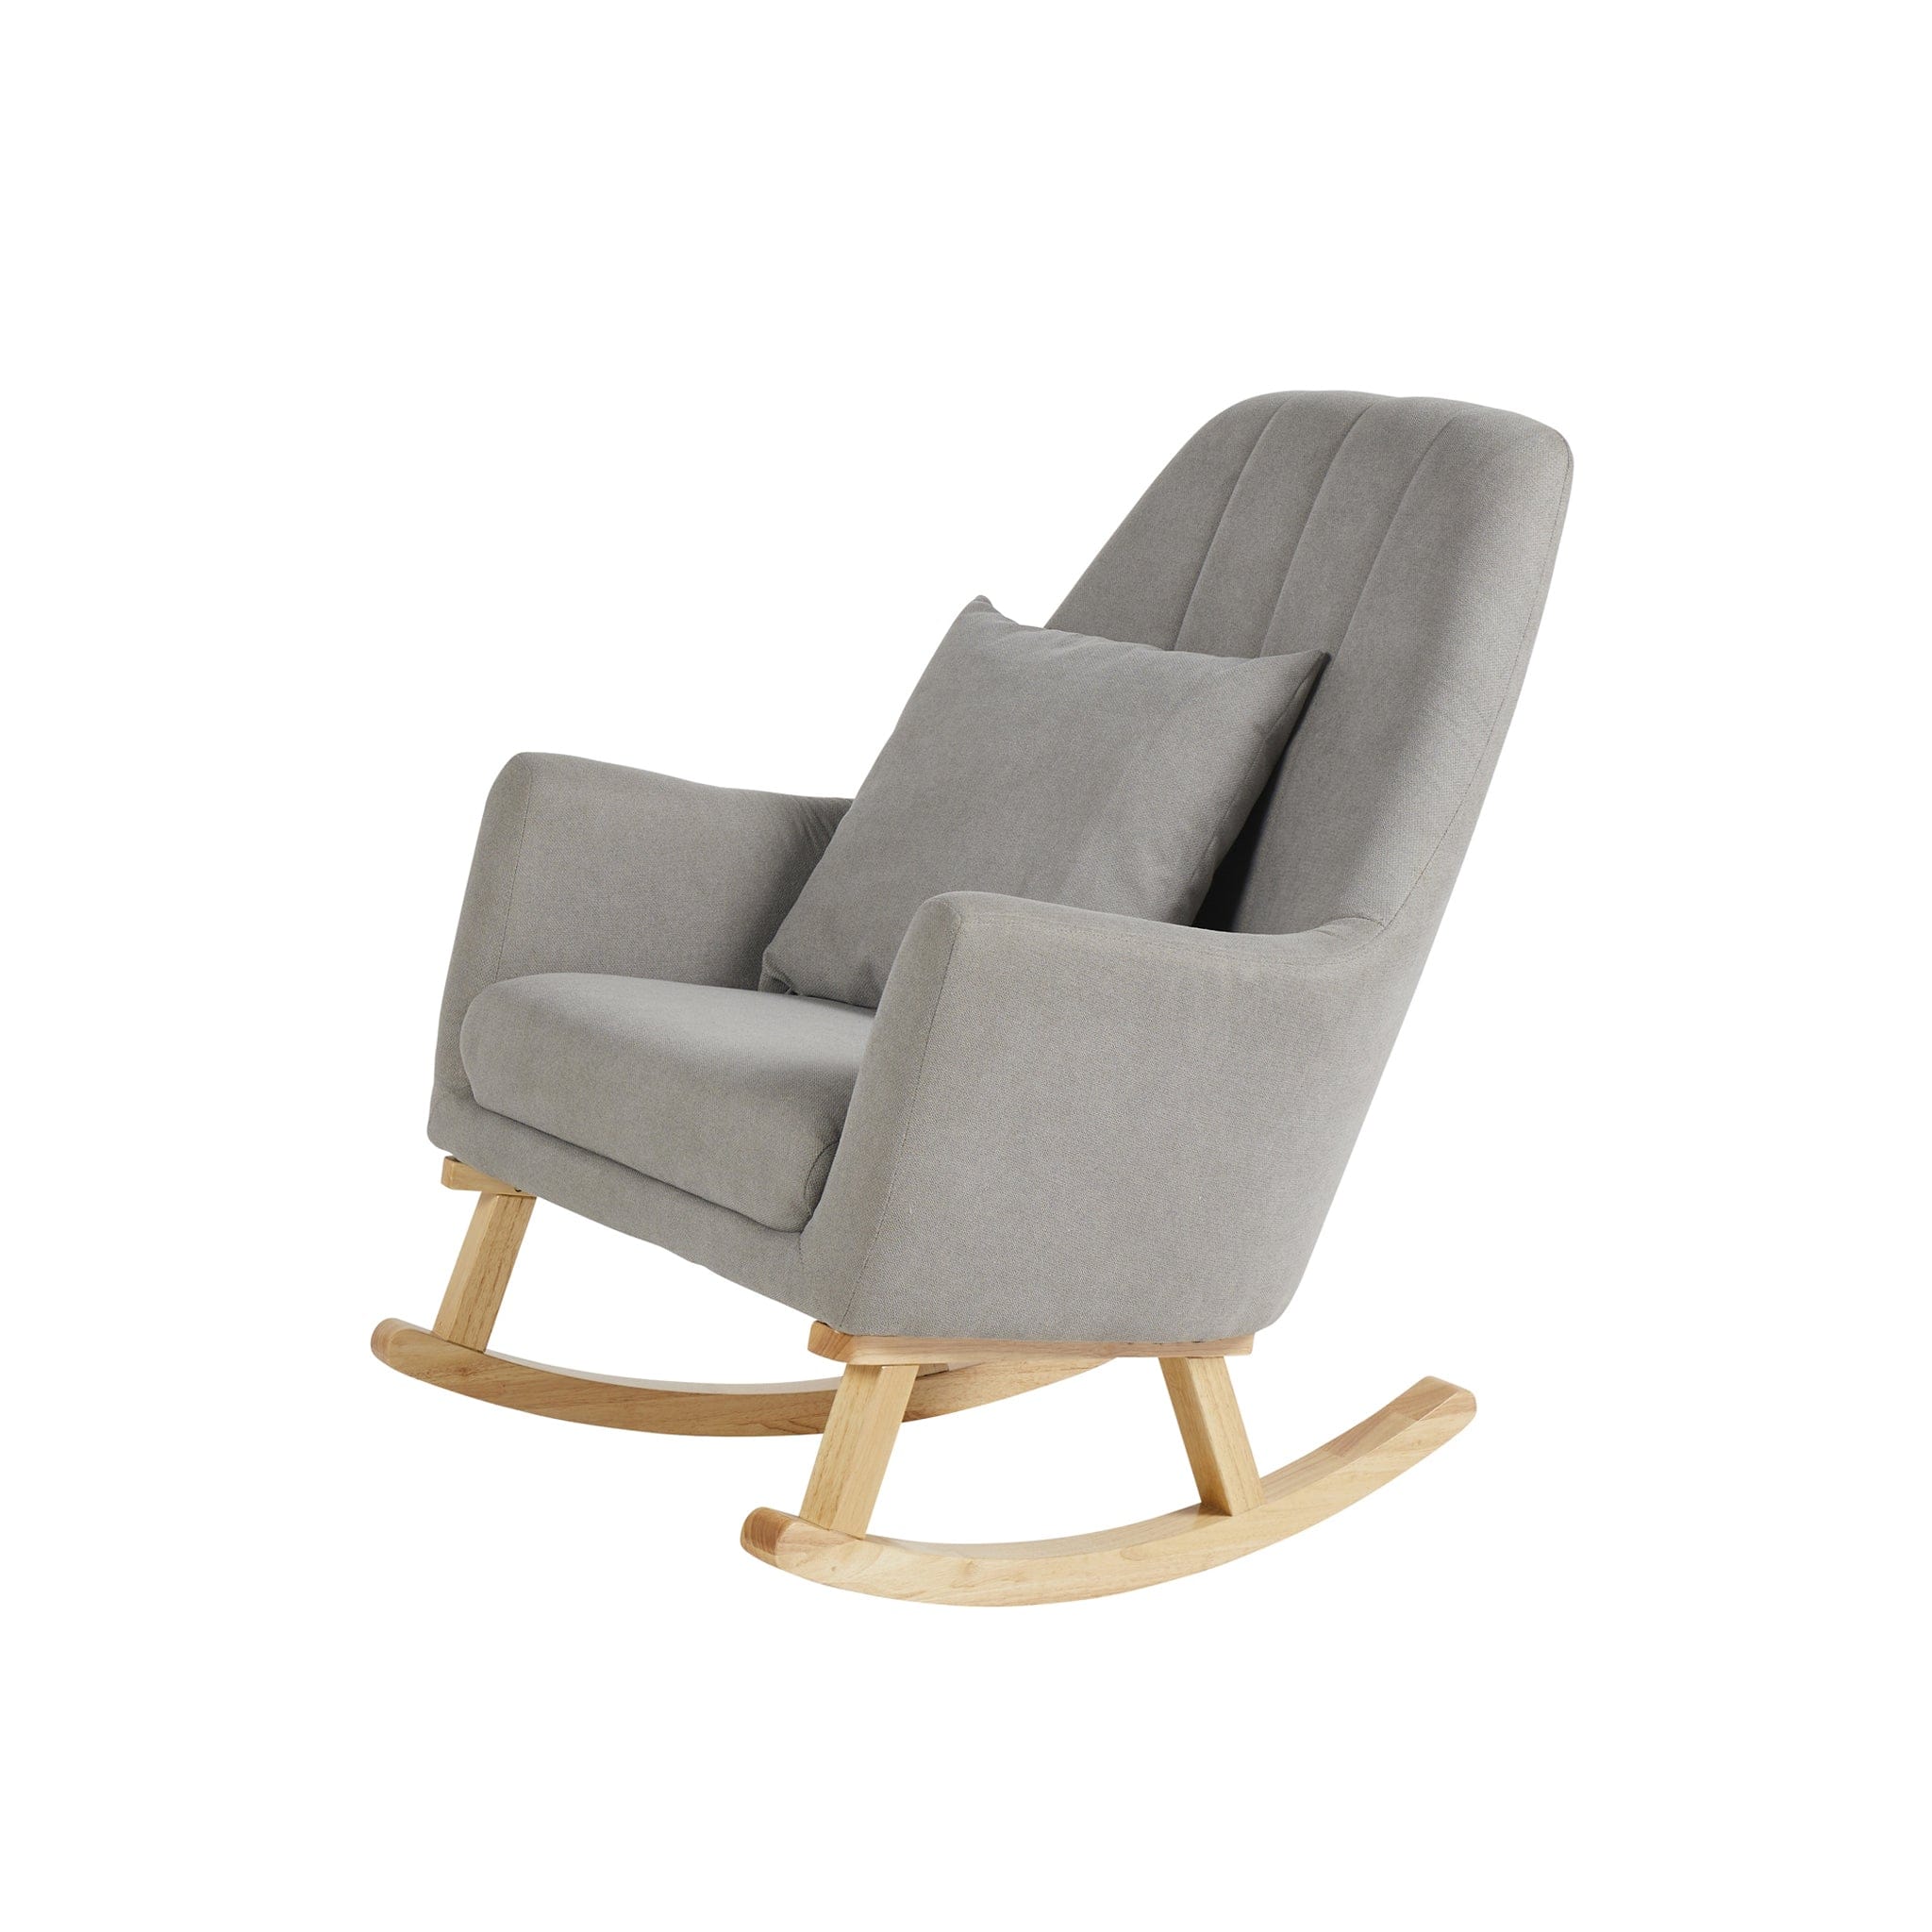 Ickle Bubba Nursing Chairs Ickle Bubba Eden Deluxe Nursery Chair Pearl Grey 48-006-000-840